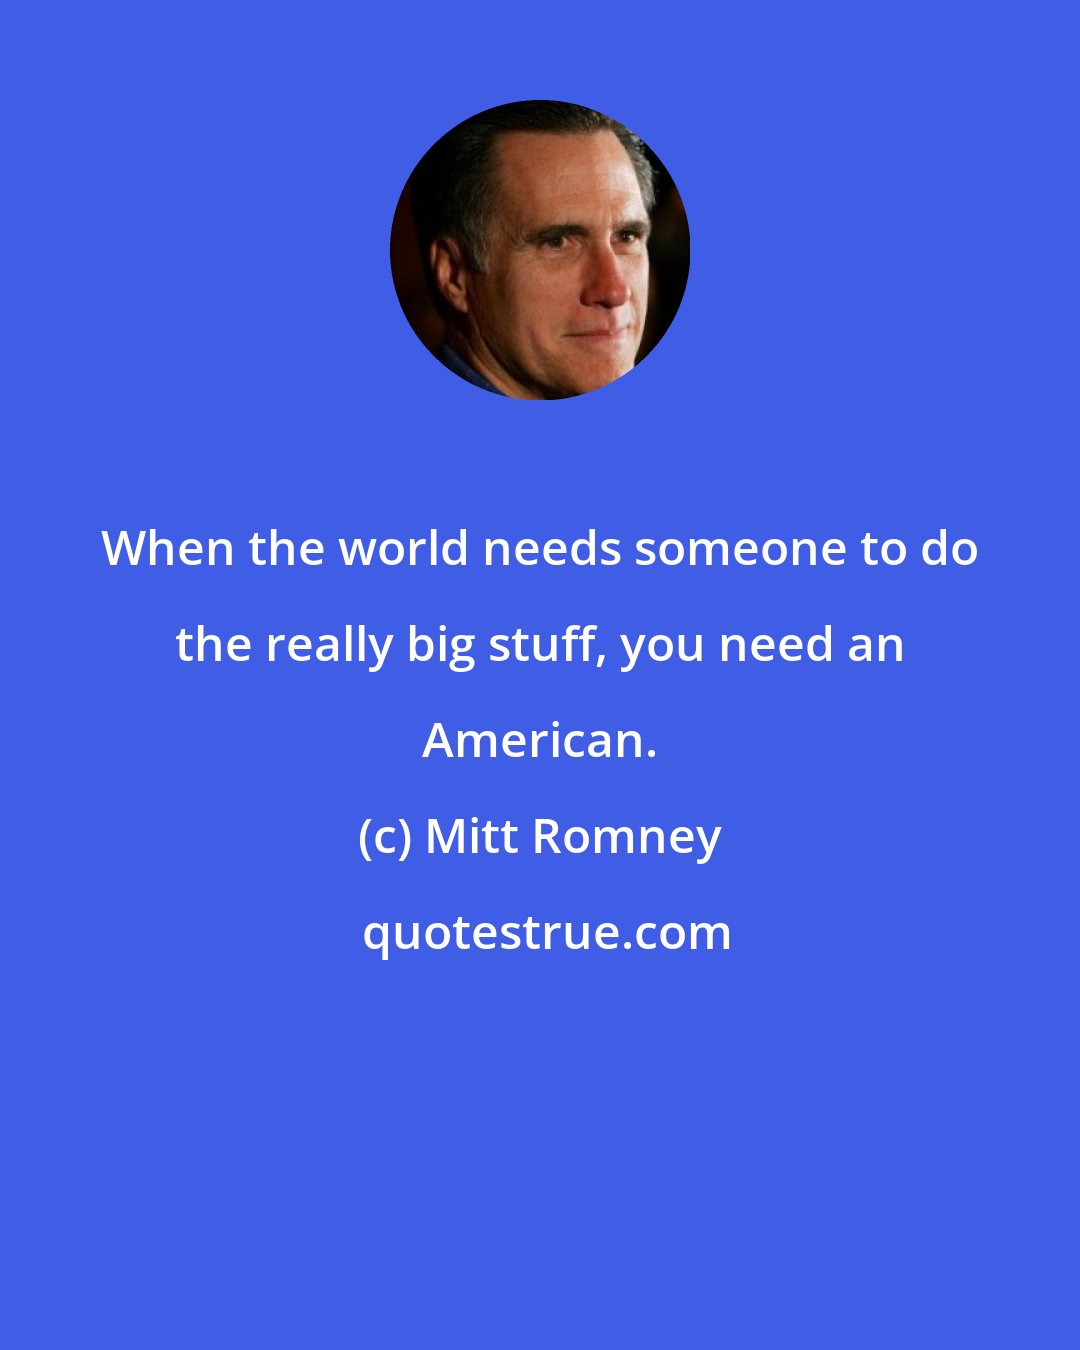 Mitt Romney: When the world needs someone to do the really big stuff, you need an American.